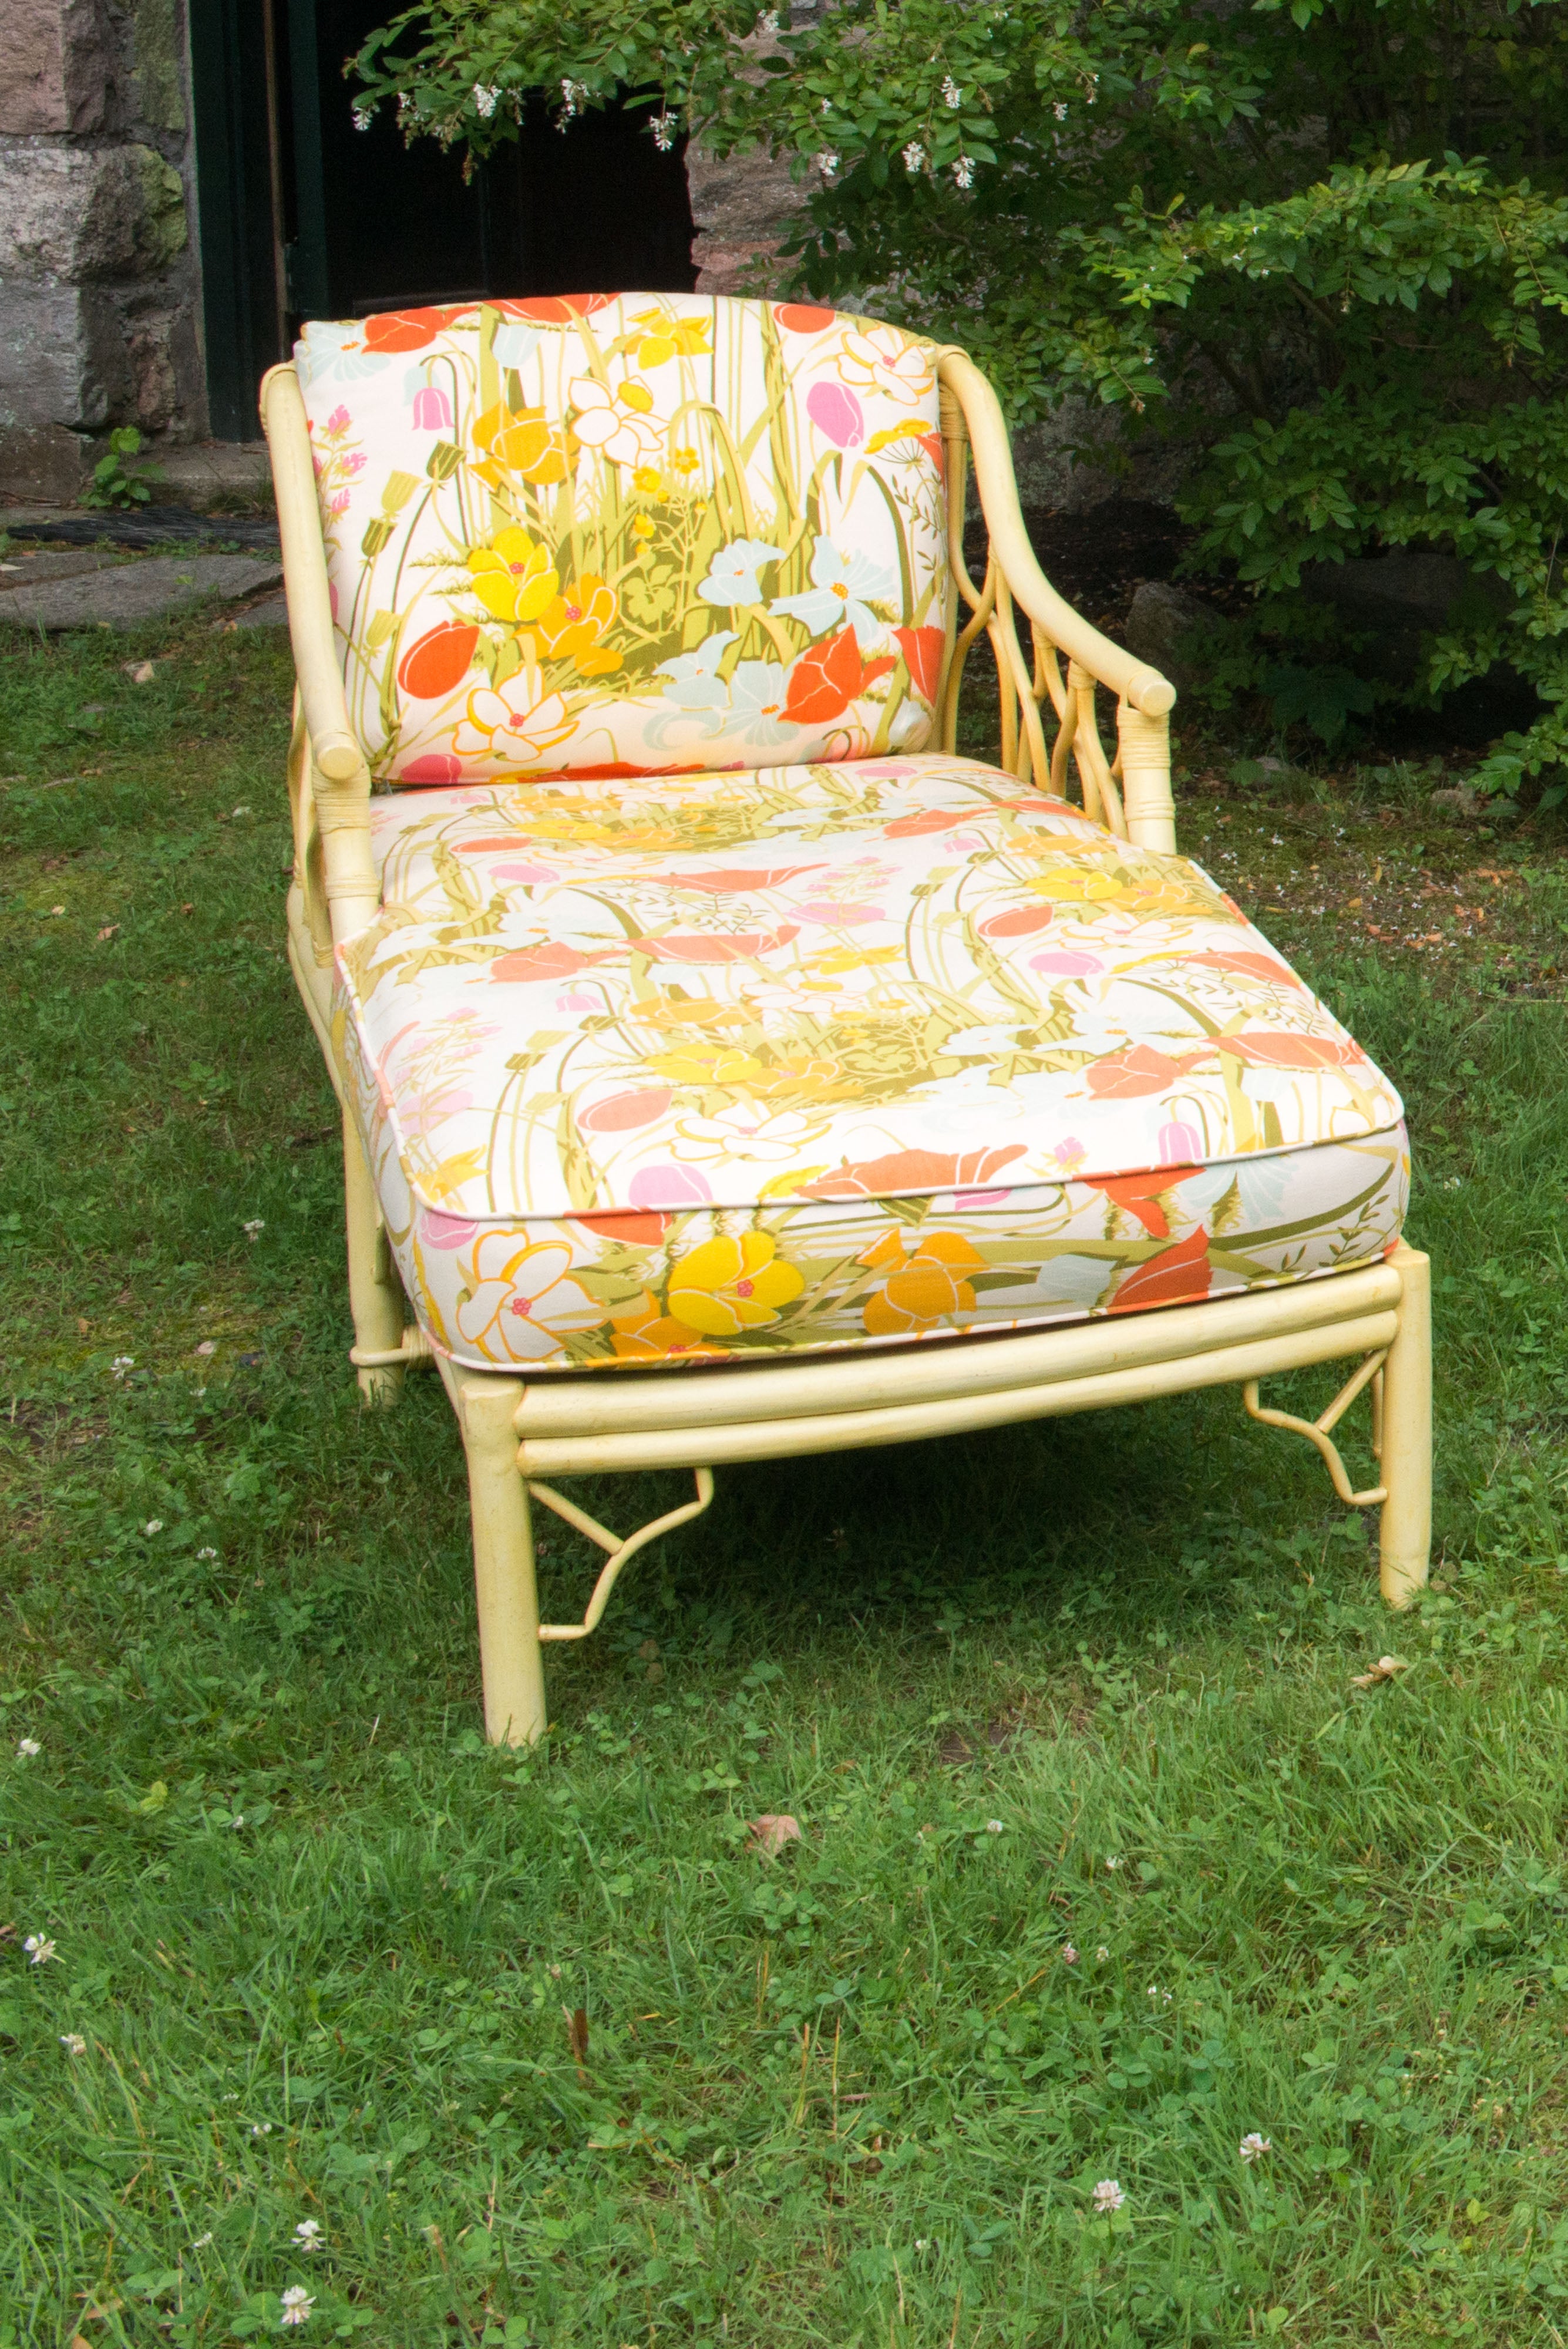 1970s vintage Ficks Reed bamboo or rattan style wood chaise longue with a chinoiserie flair. Original yellow finish with original fabric. Cushion foam has hardened. In quite remarkable shape.